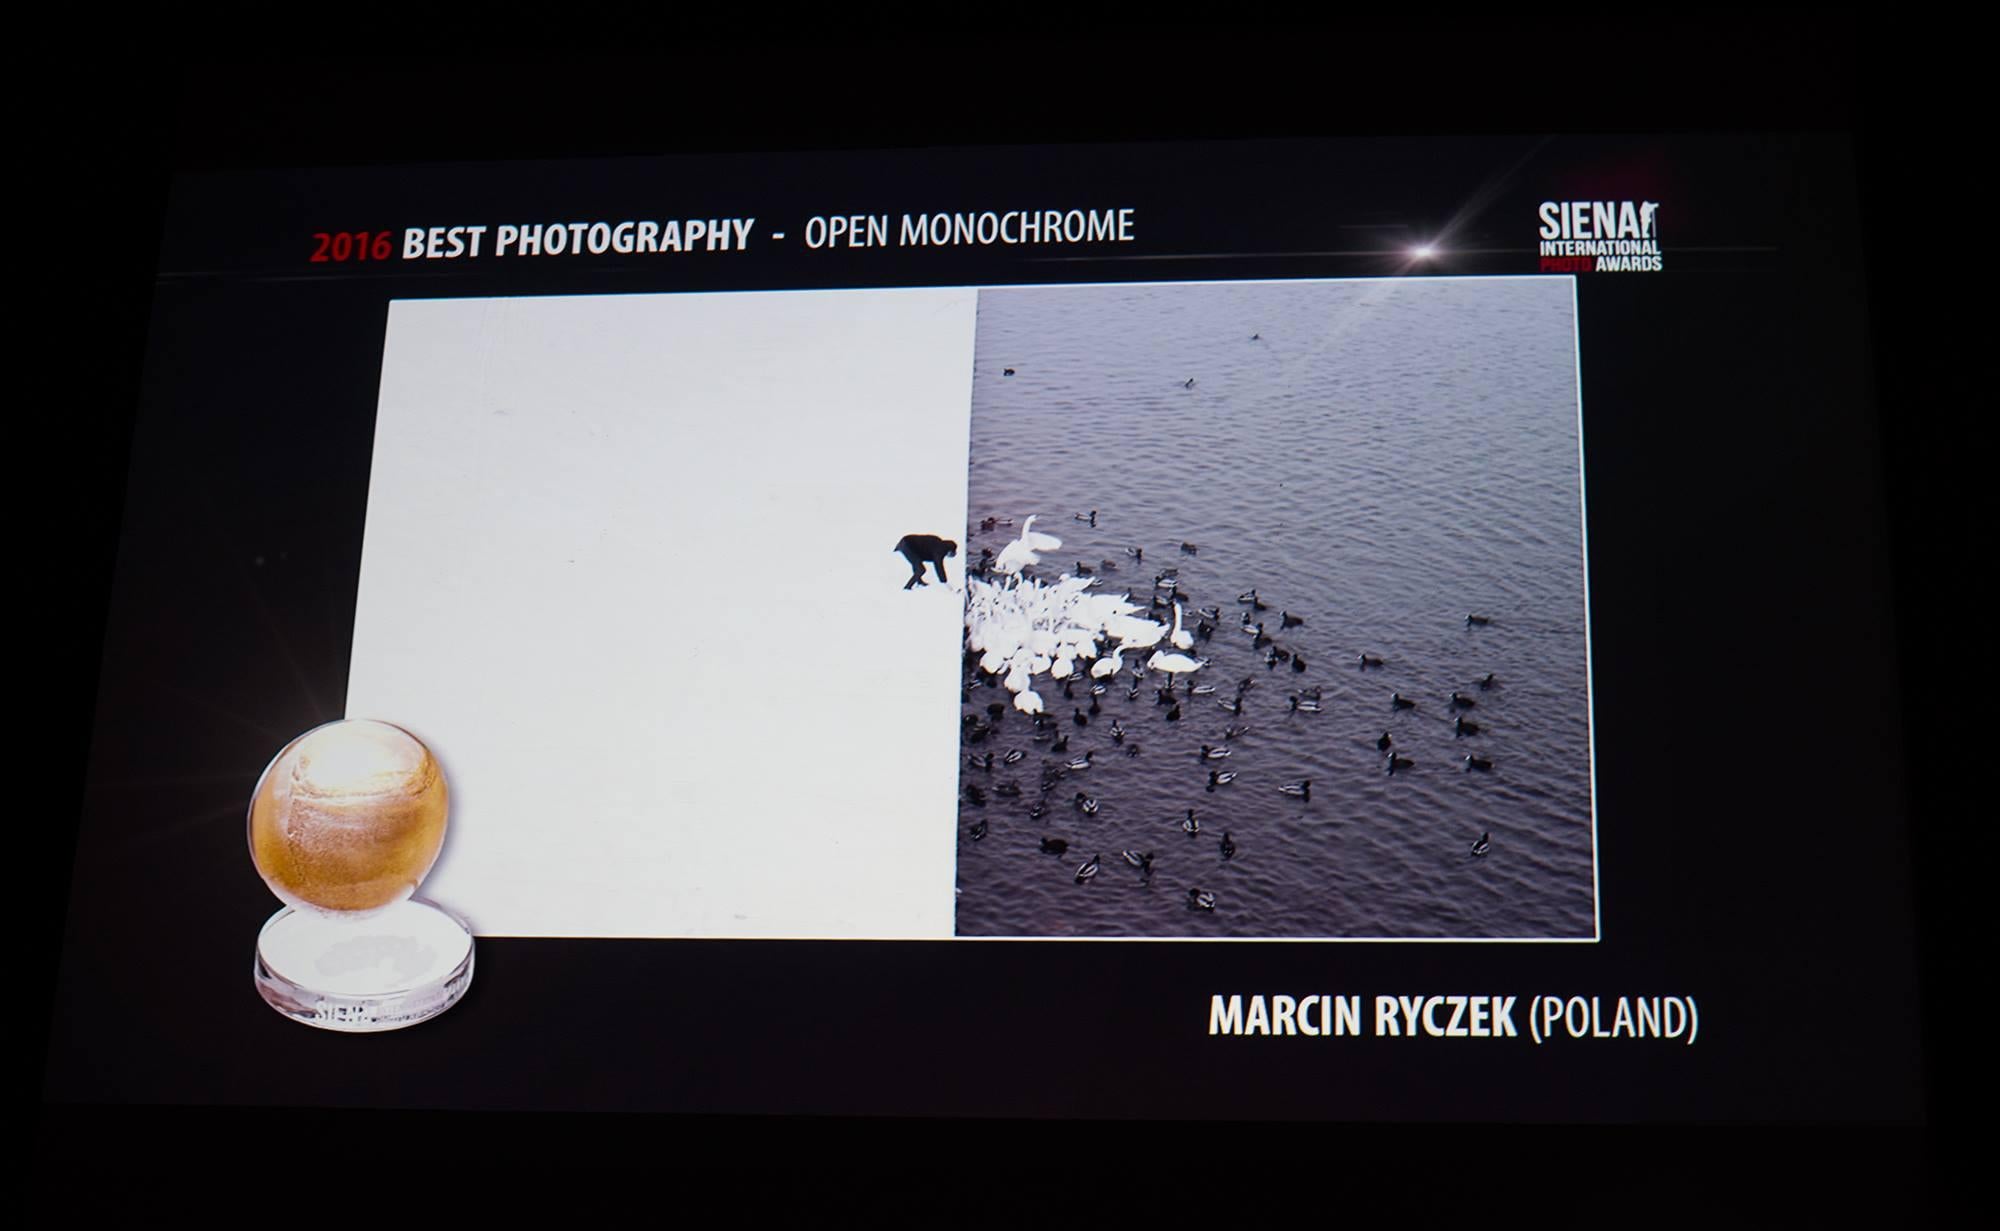 A Man Feeding Swans in the Snow - Grand Prix NYPH New York Photo Festival 2015 - Gray Black and White Photograph by Marcin Ryczek